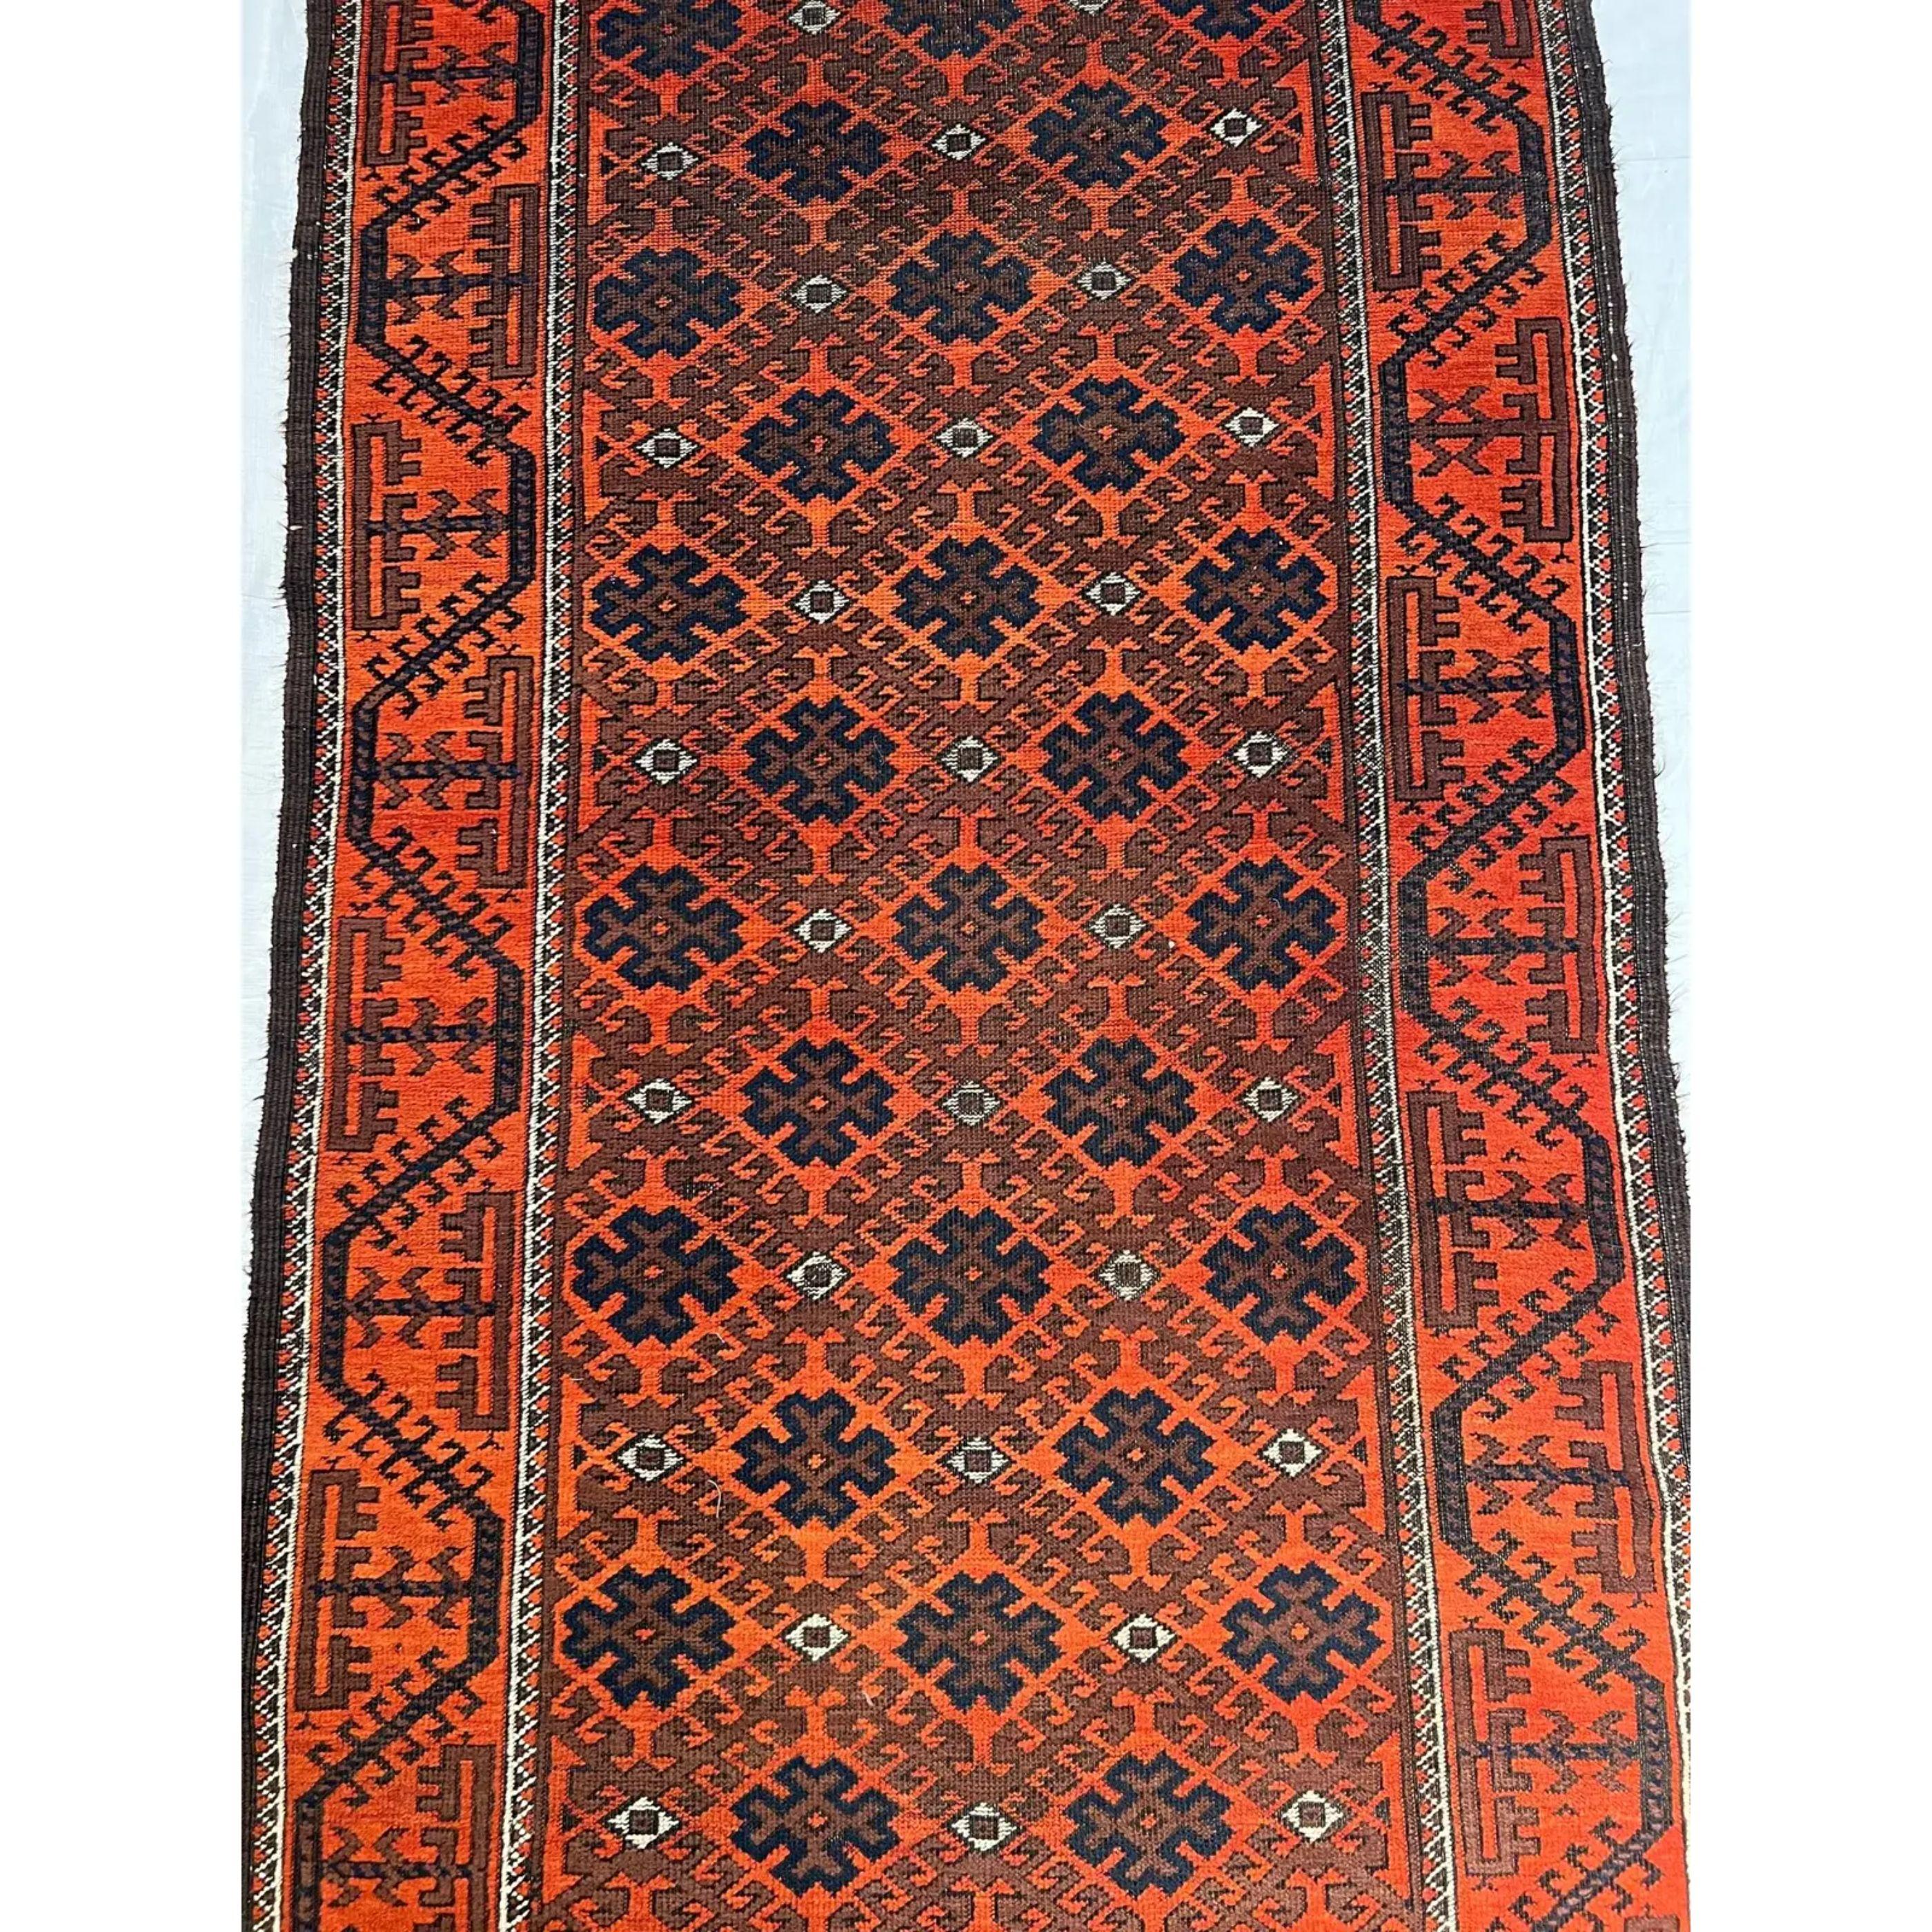 1900s Antique Persian Baloutch Rug, handmade and hand-knotted